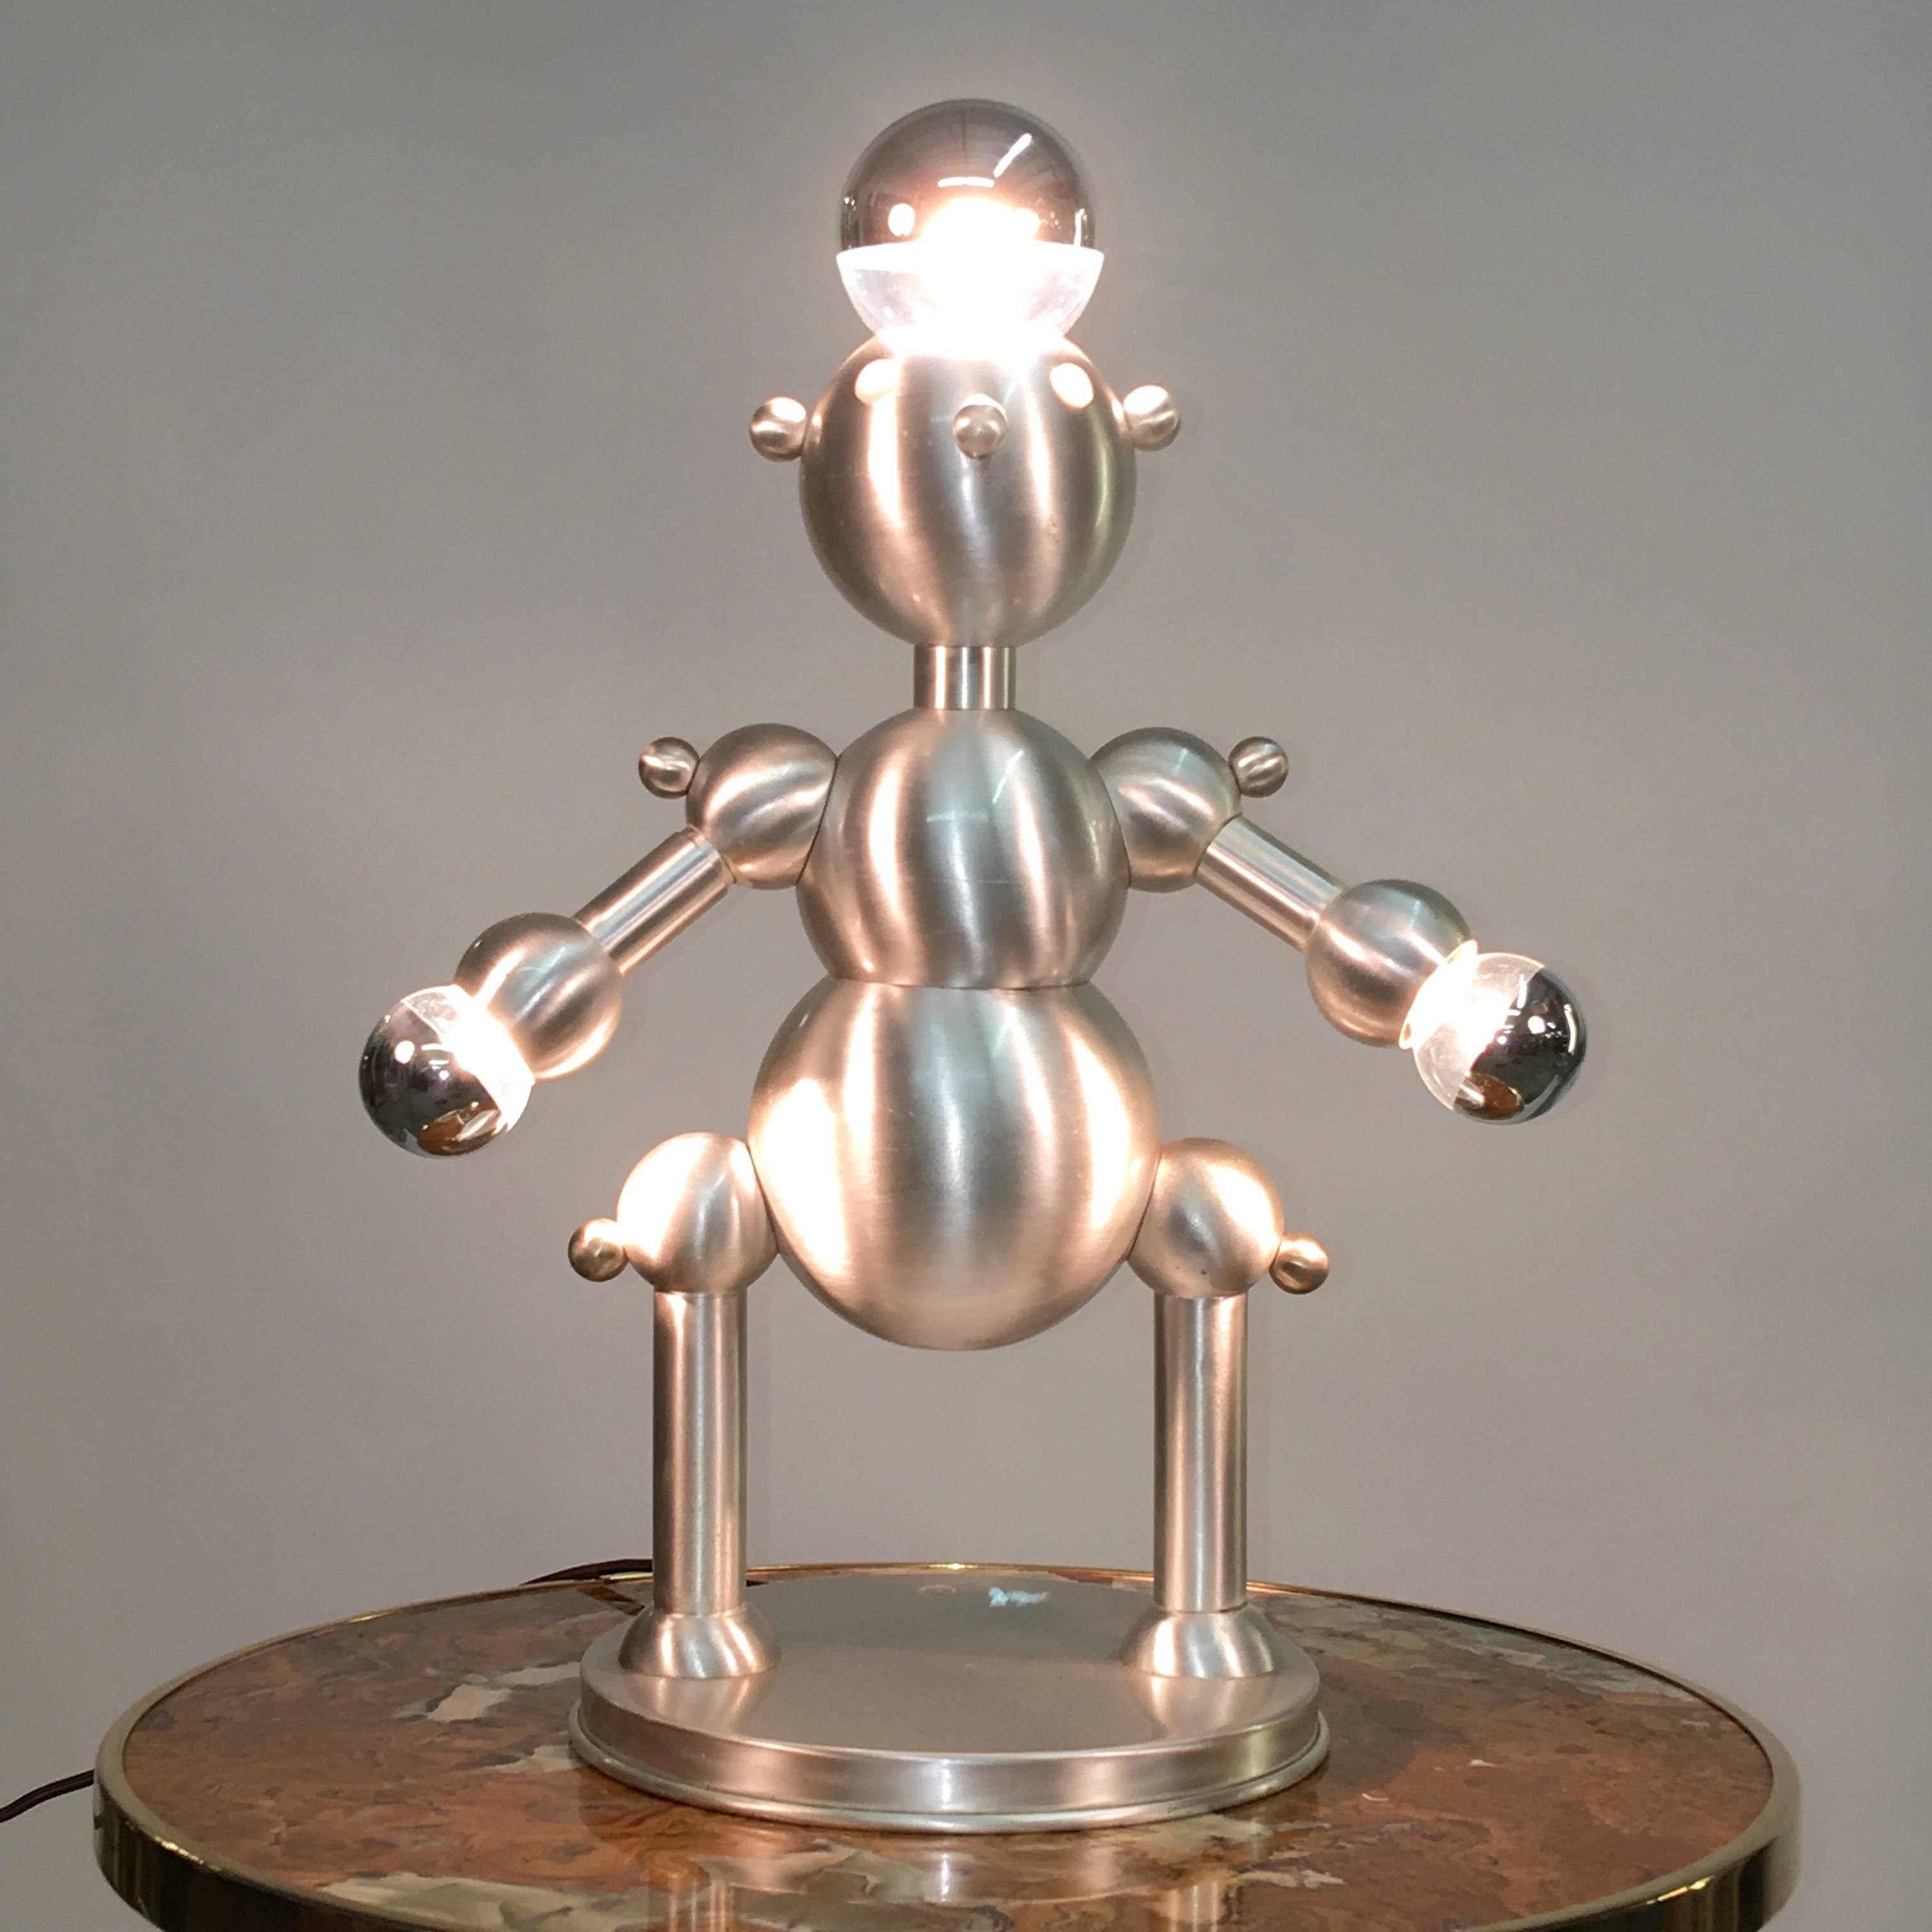 Copper Silver Plated Robot Lamp